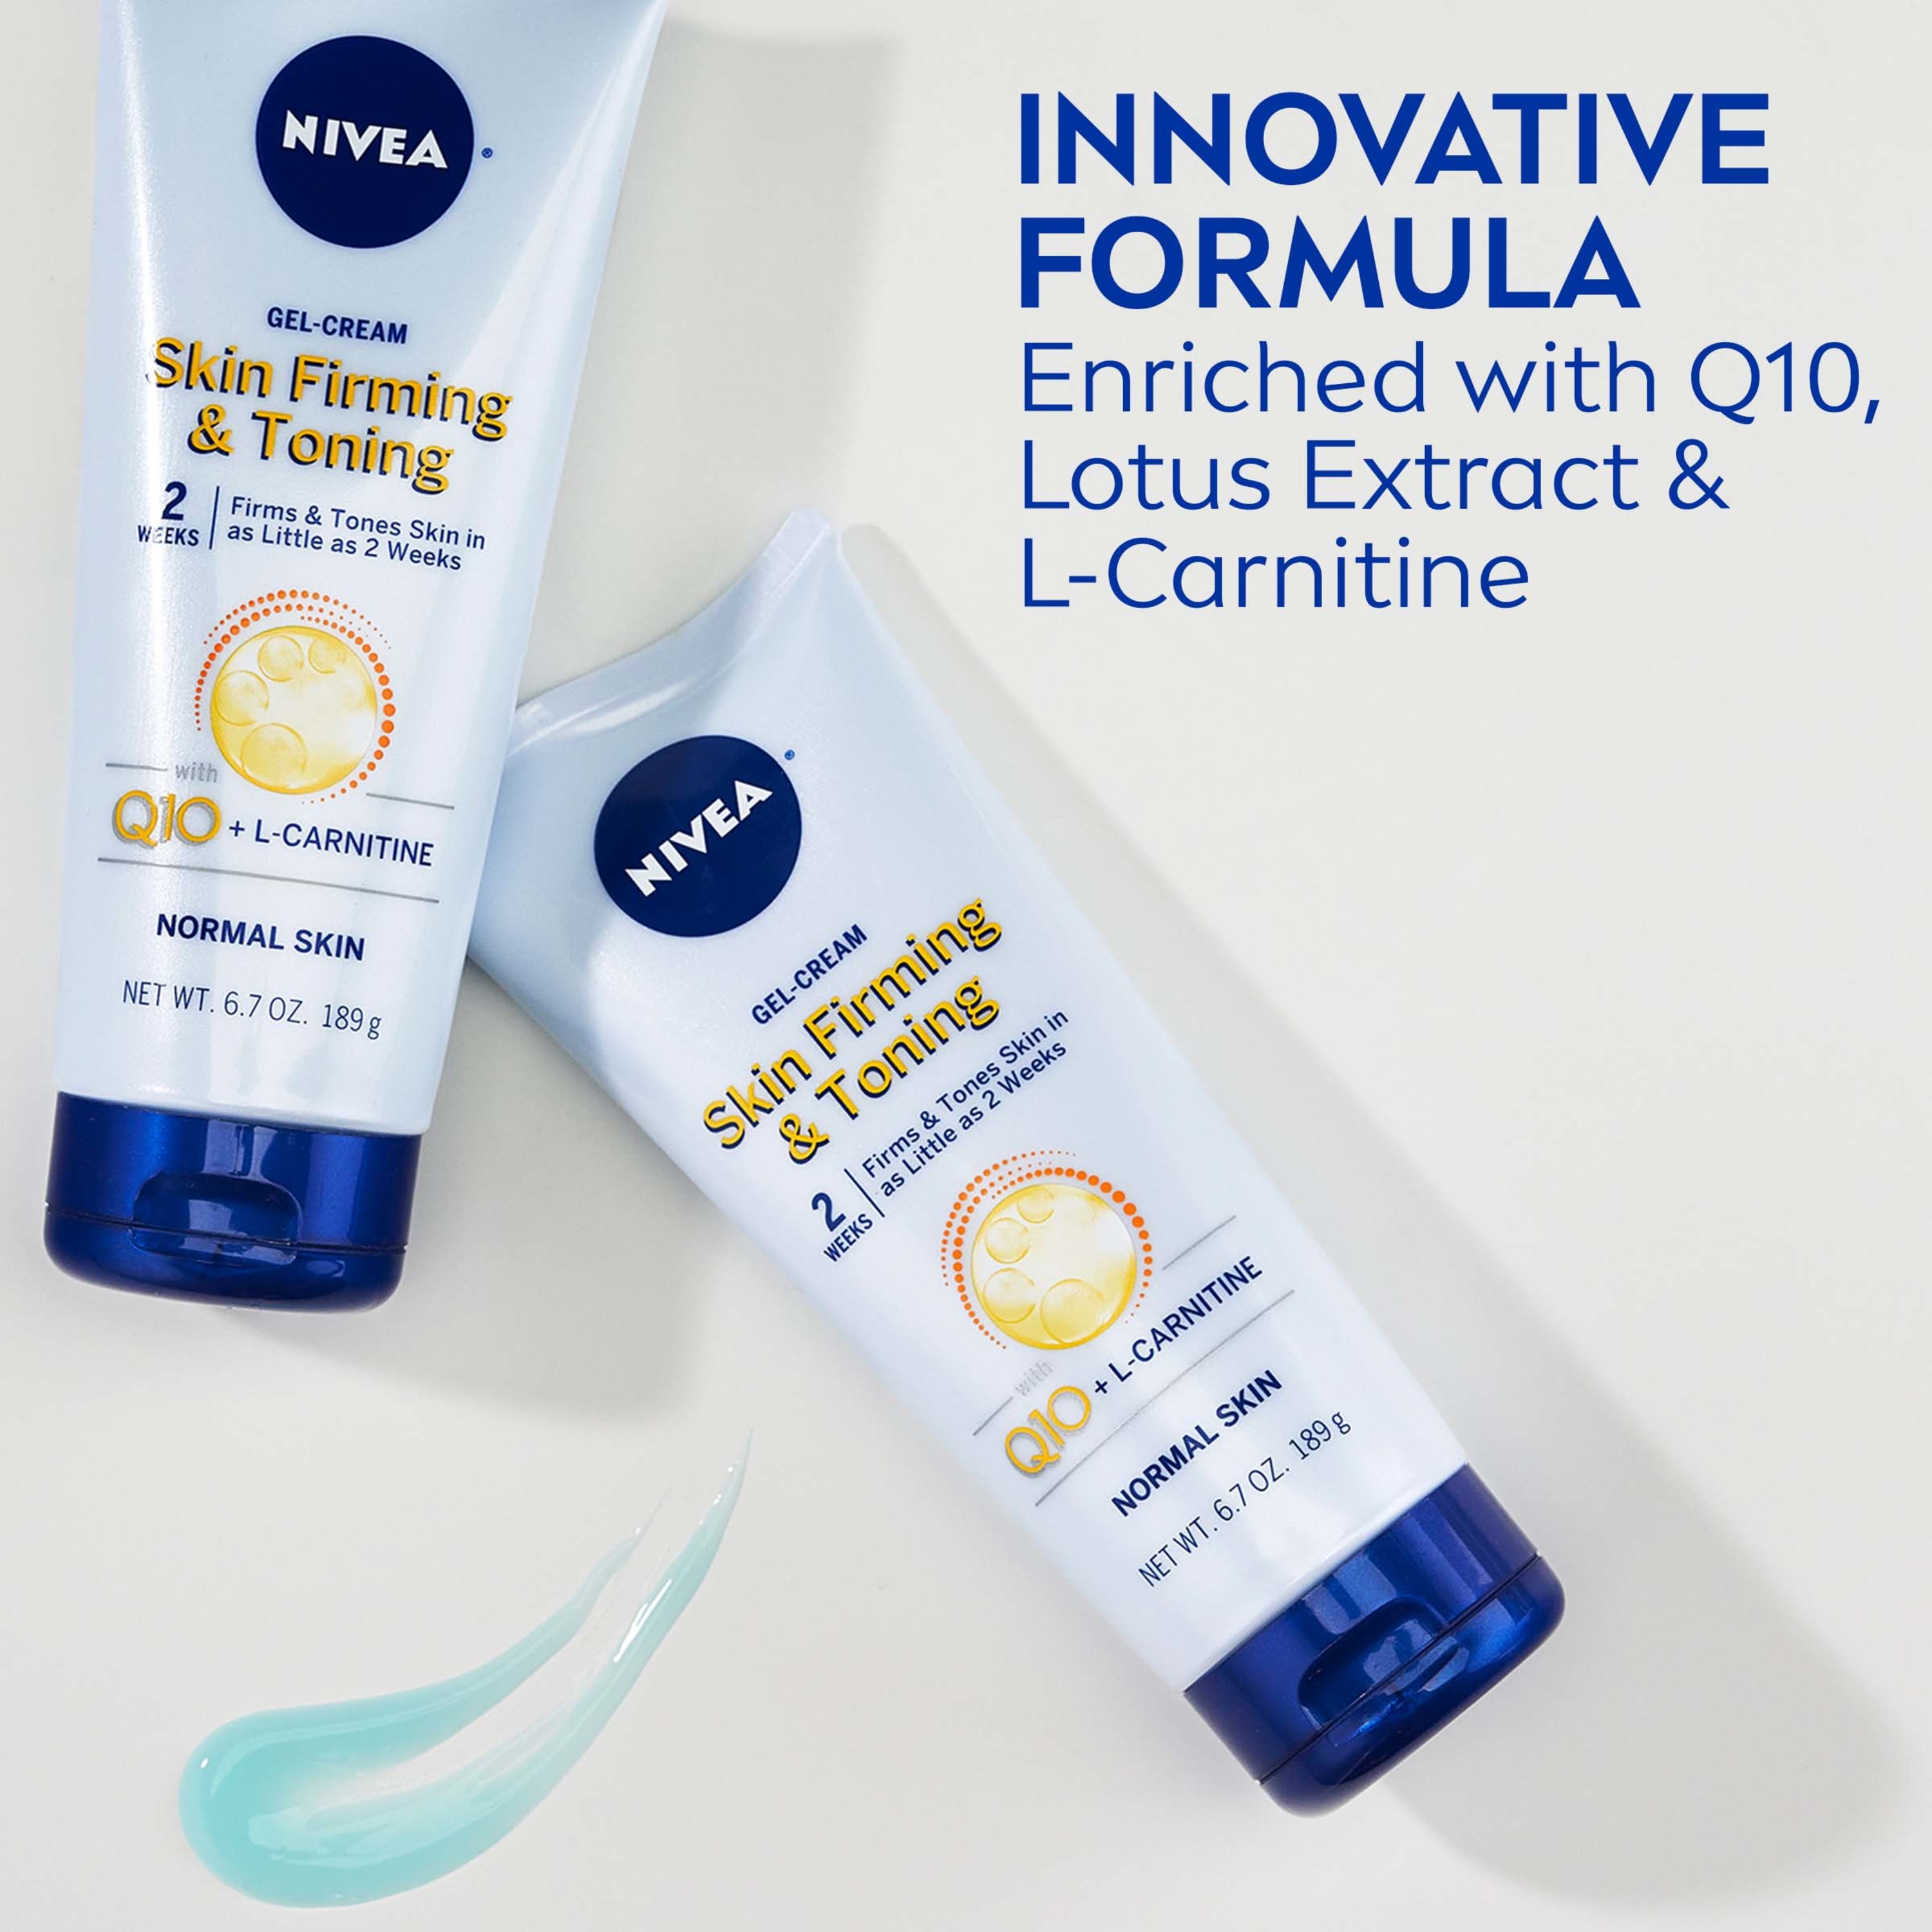 NIVEA Skin Firming and Toning Body Gel-Cream with Q10, 6.7 Oz Tube - image 8 of 12